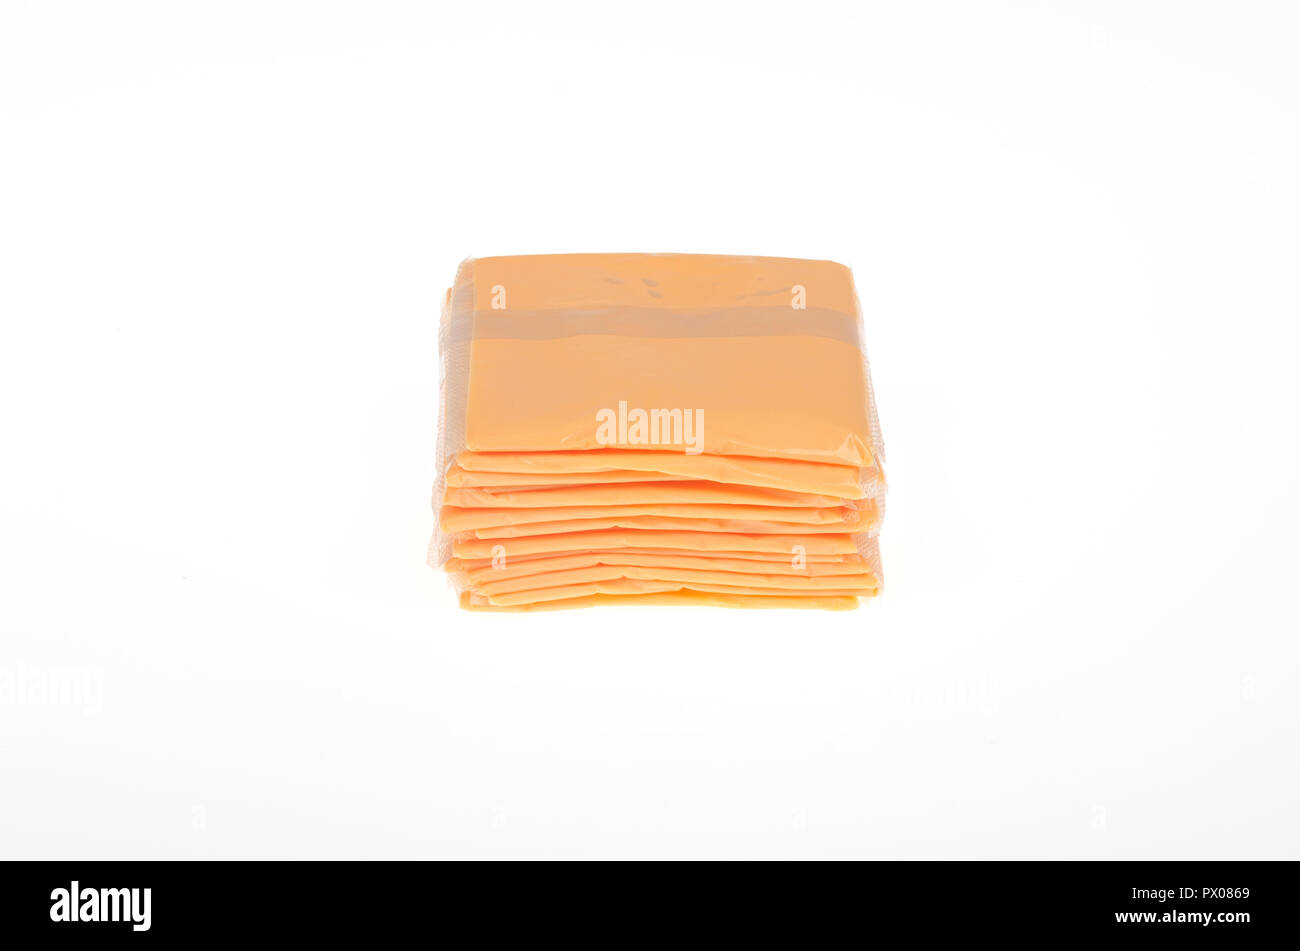 Stack of individually wrapped slices of orange american processed cheese on white Stock Photo